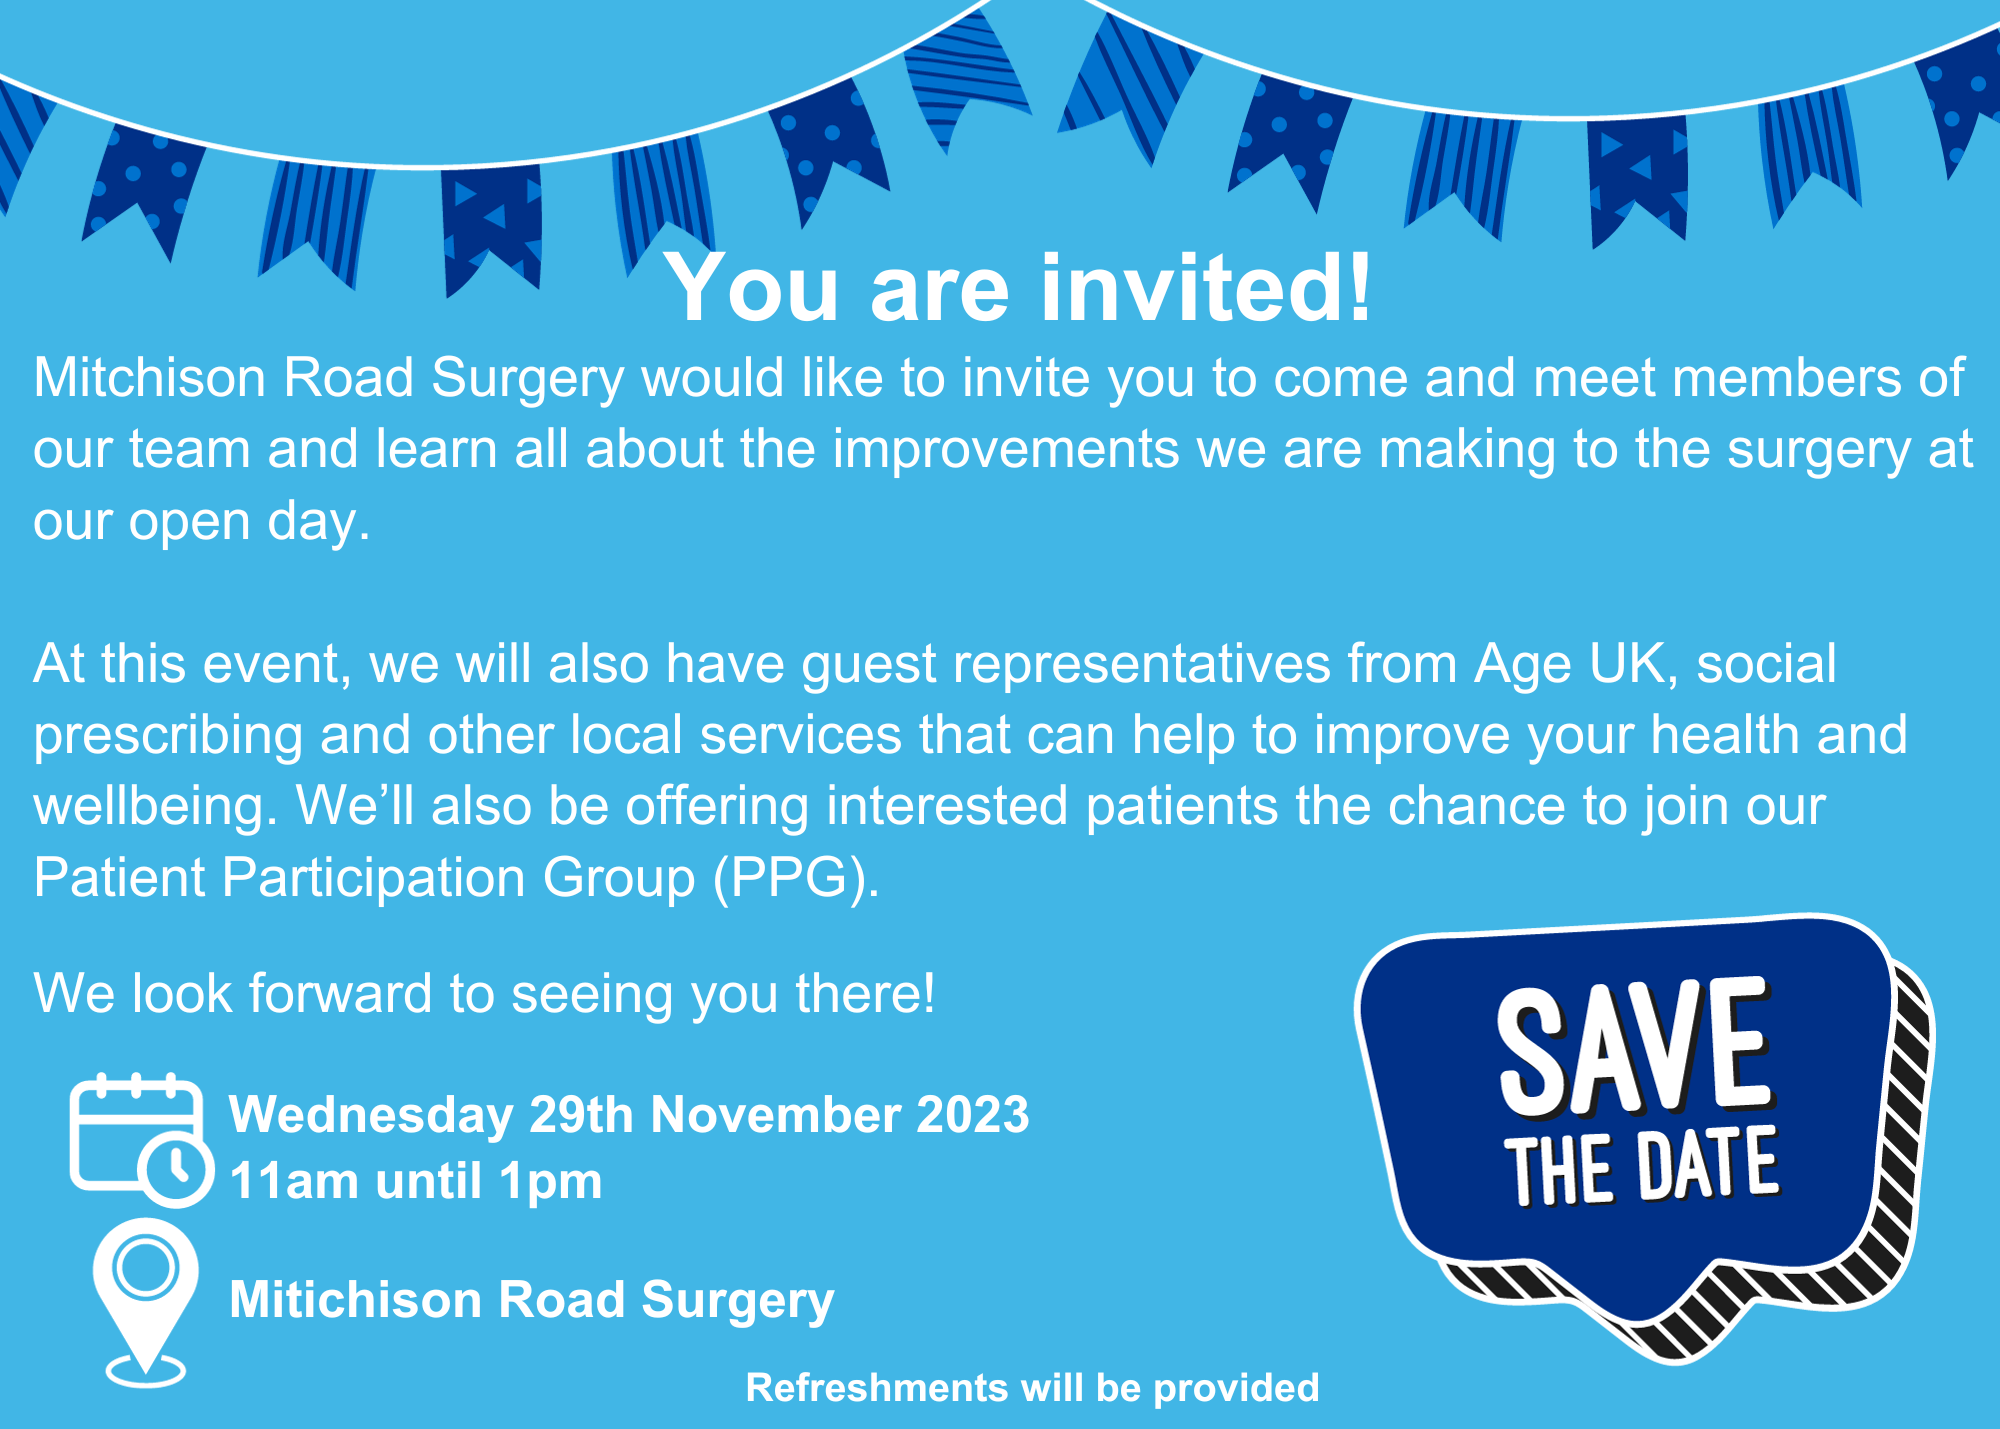 Mitchison Road Surgery would like to invite you to come and meet members of our team and learn all about the improvements we are making to the surgery at our open day. At this event, we will also have guest representatives from Age UK, social prescribing and other local services that can help to improve your health and wellbeing. We’ll also be offering interested patients the chance to join our Patient Participation Group (PPG). We look forward to seeing you there! 